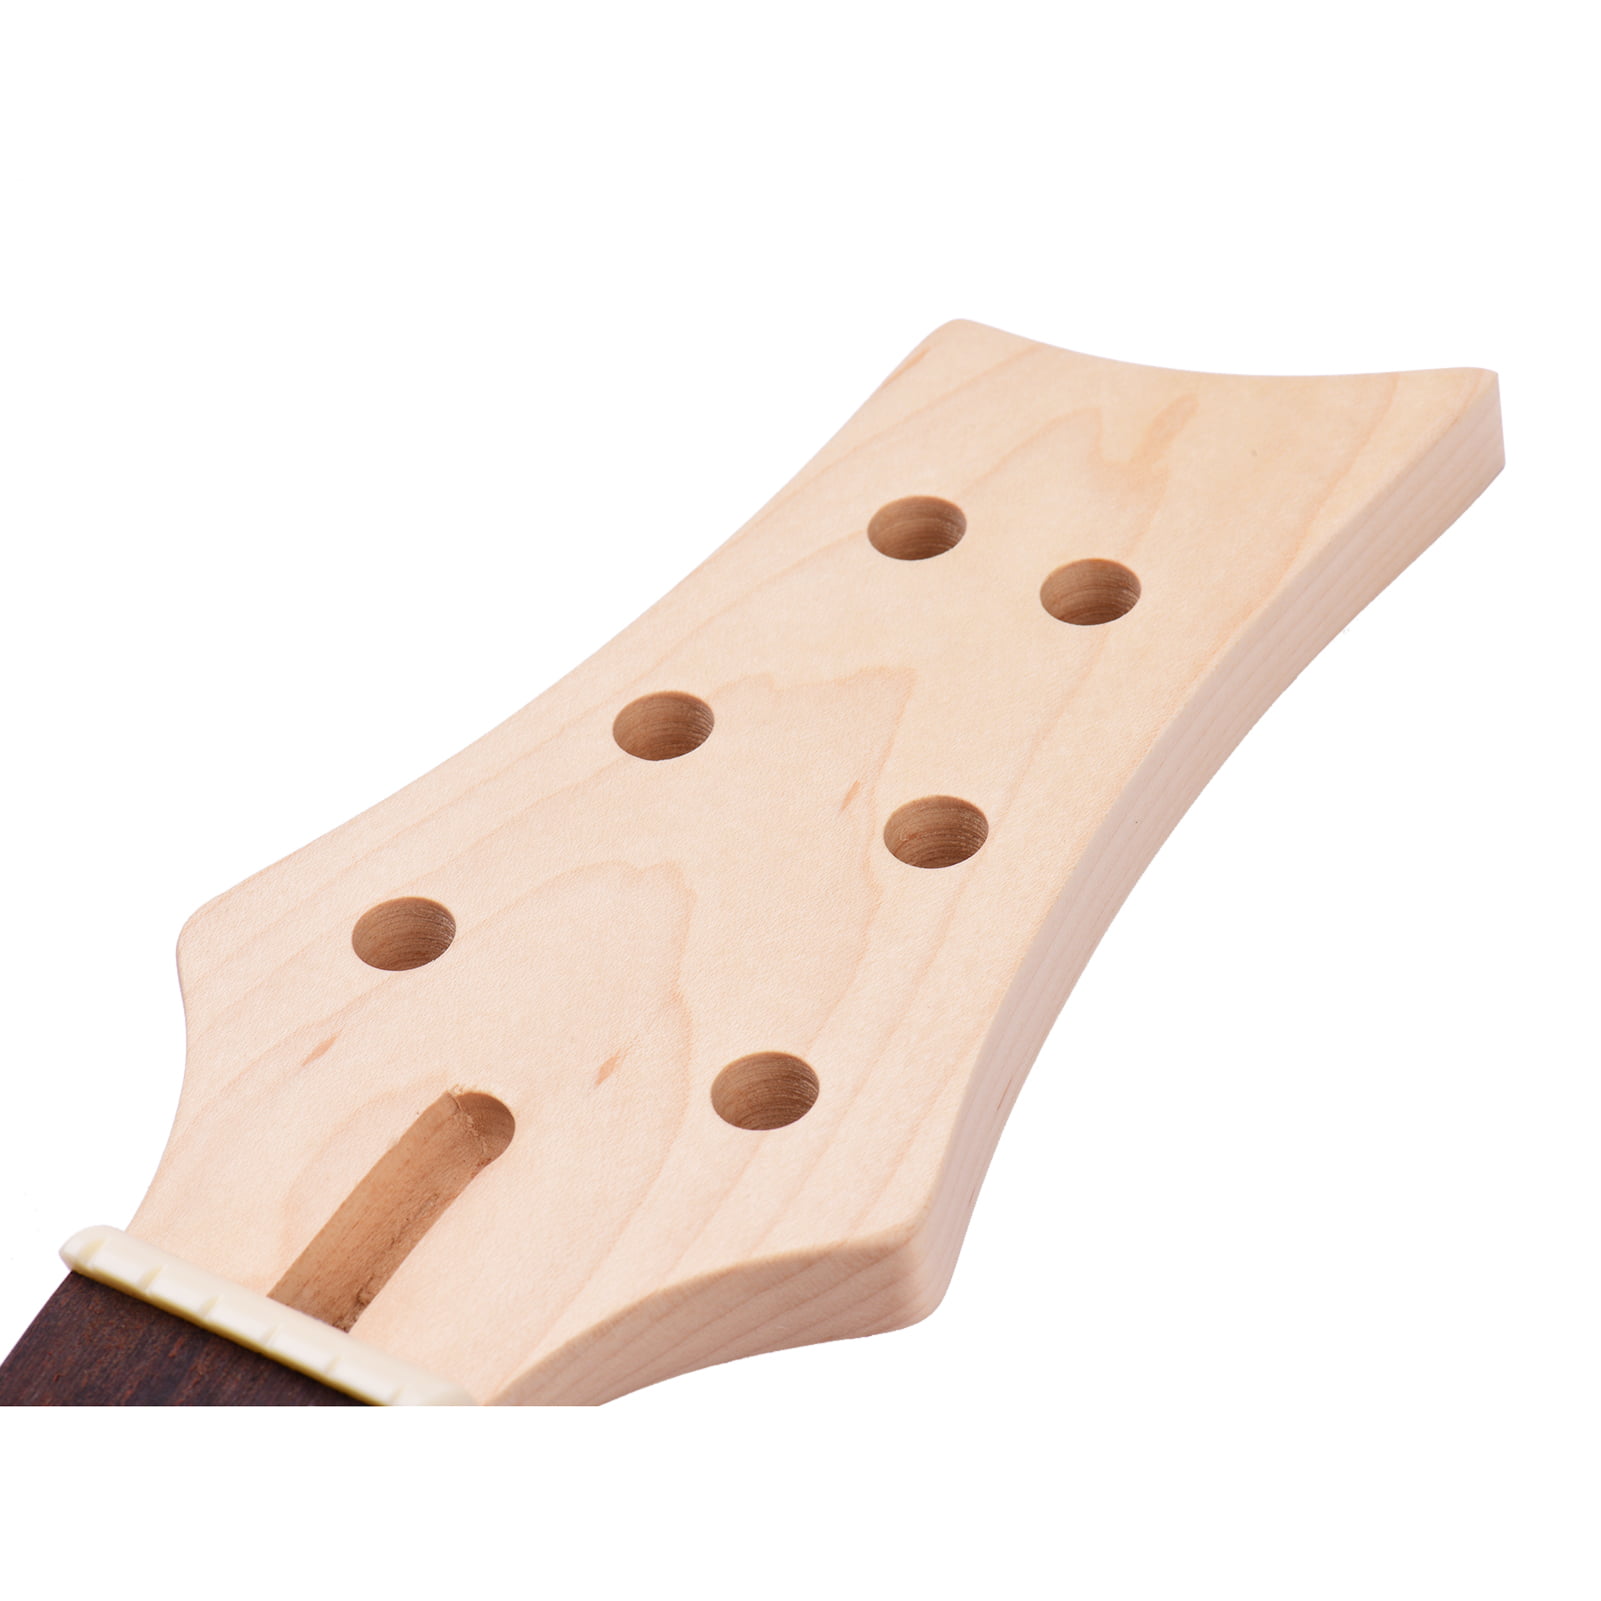 with White Birds Inlay Replacement,Wood 22 Frets Maple Wood Fingerboard ABMBERTK Universal Unfinished Electric Guitar Neck